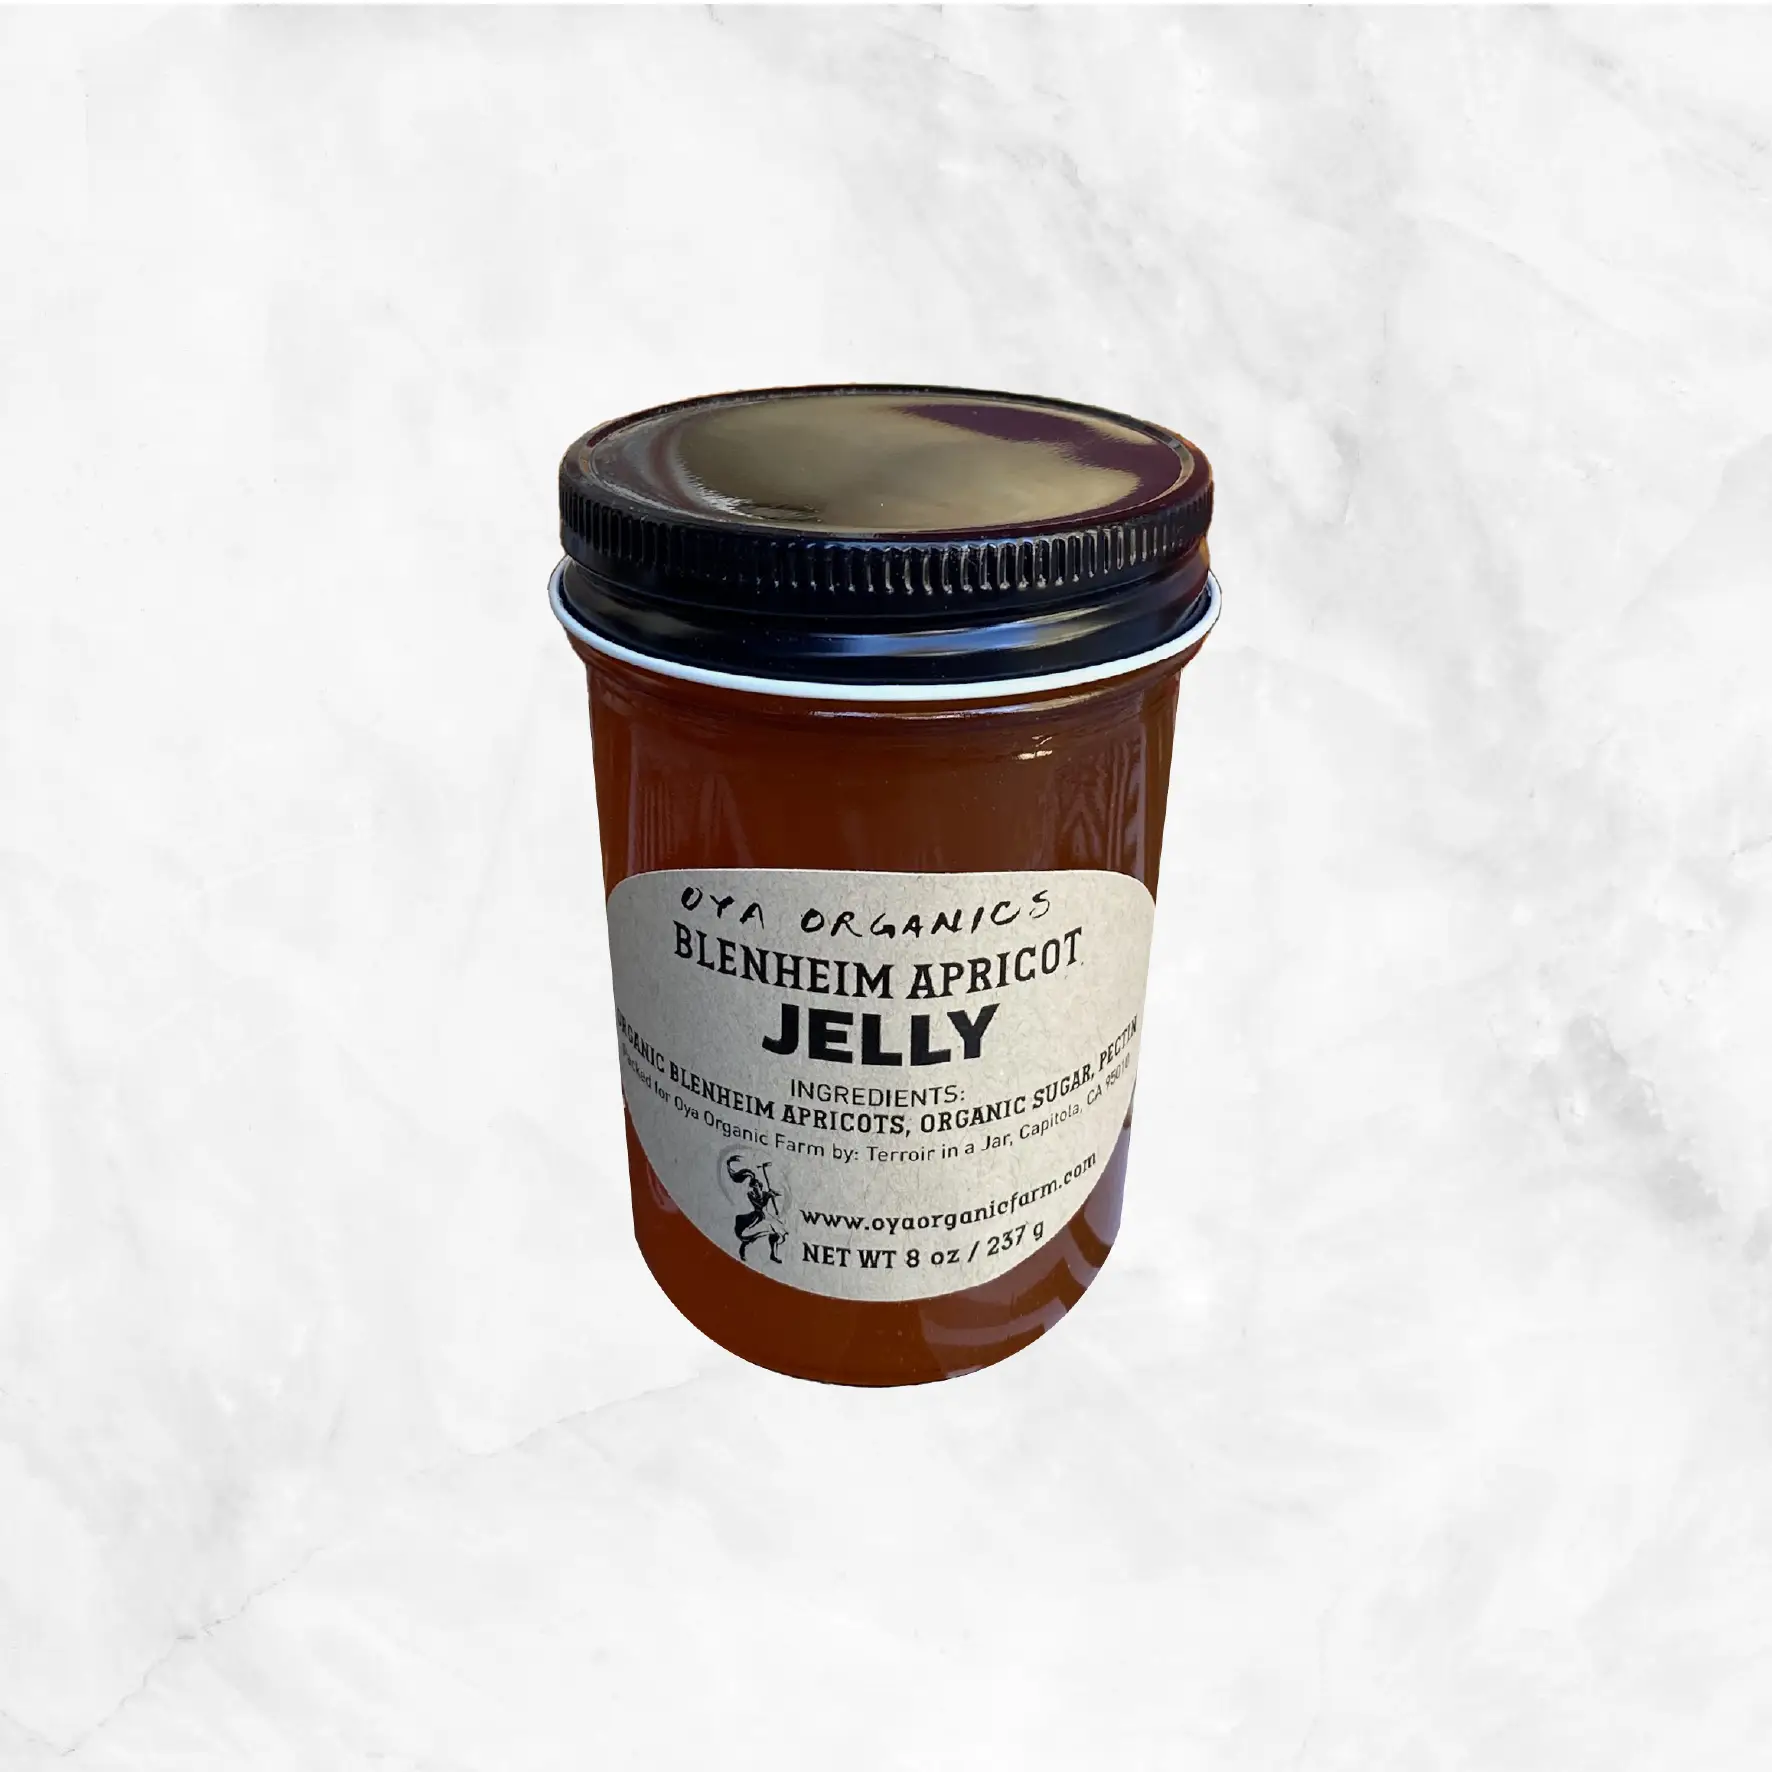 Blenheim Apricot Jelly Delivery